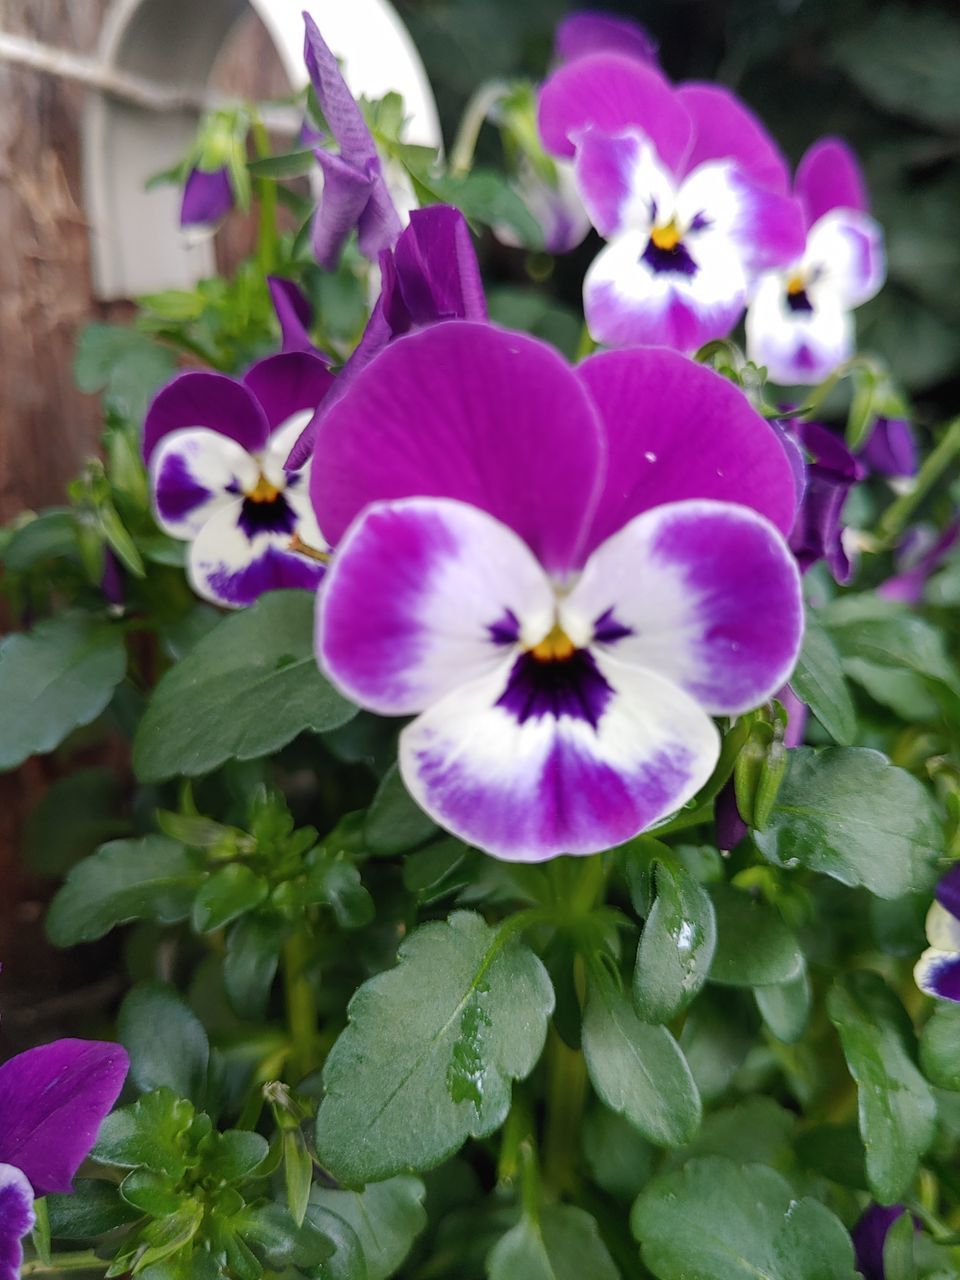 flower, flowering plant, plant, petal, beauty in nature, freshness, vulnerability, fragility, close-up, purple, flower head, inflorescence, growth, no people, nature, day, plant part, focus on foreground, leaf, pansy, outdoors